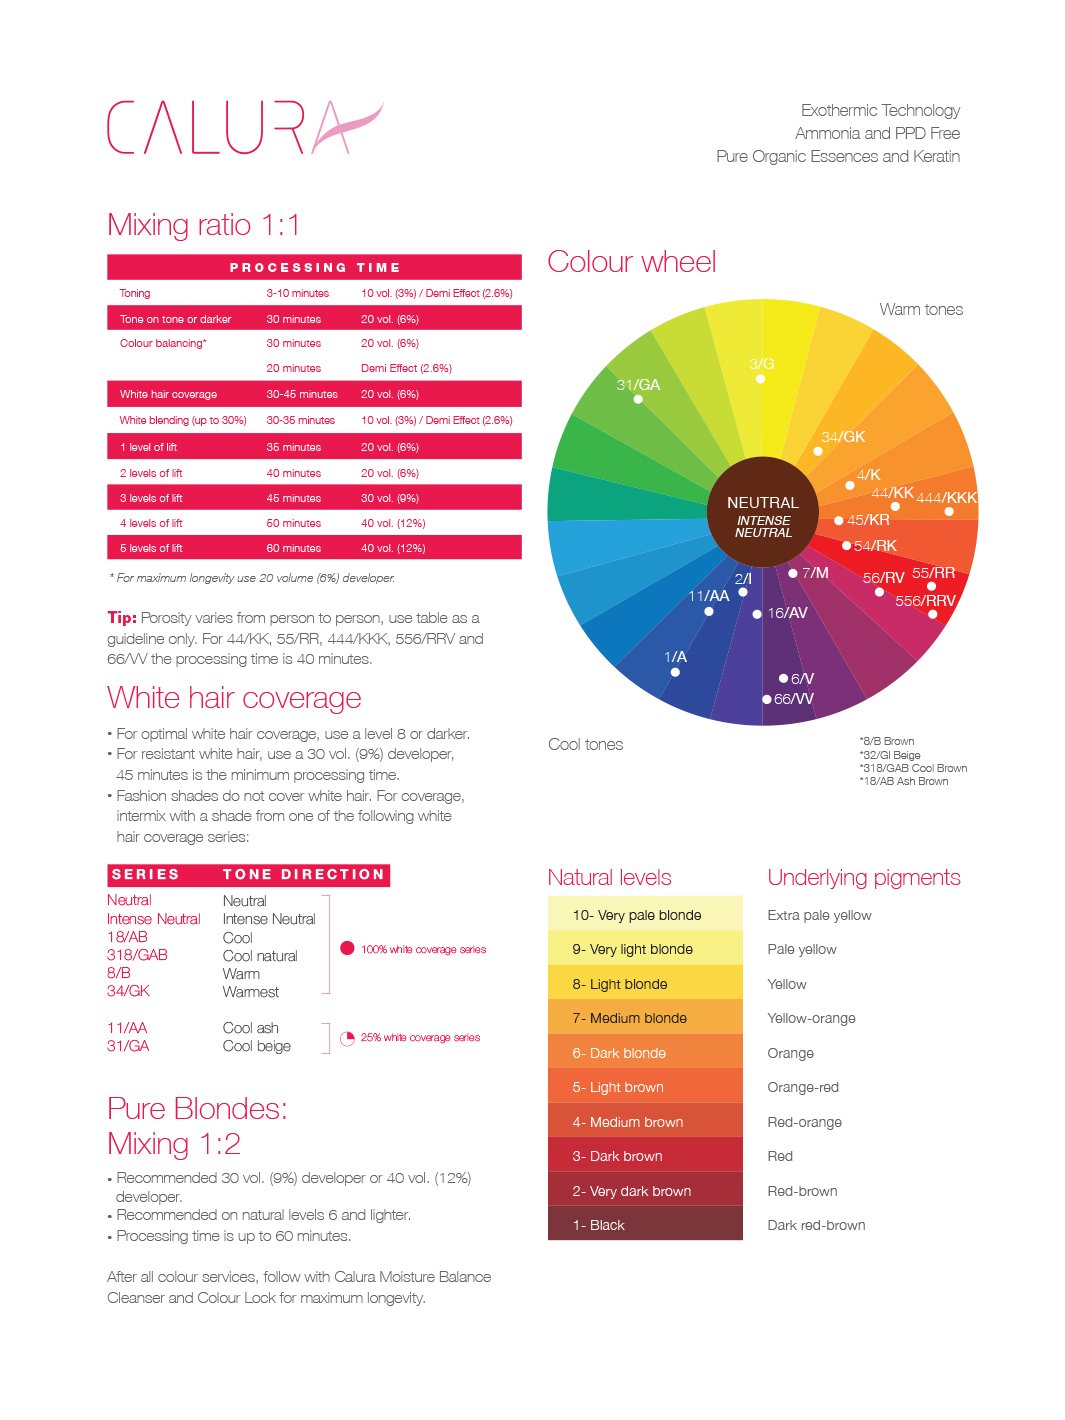 Calura Permanent Color Reference 1 Pager (digital copy)